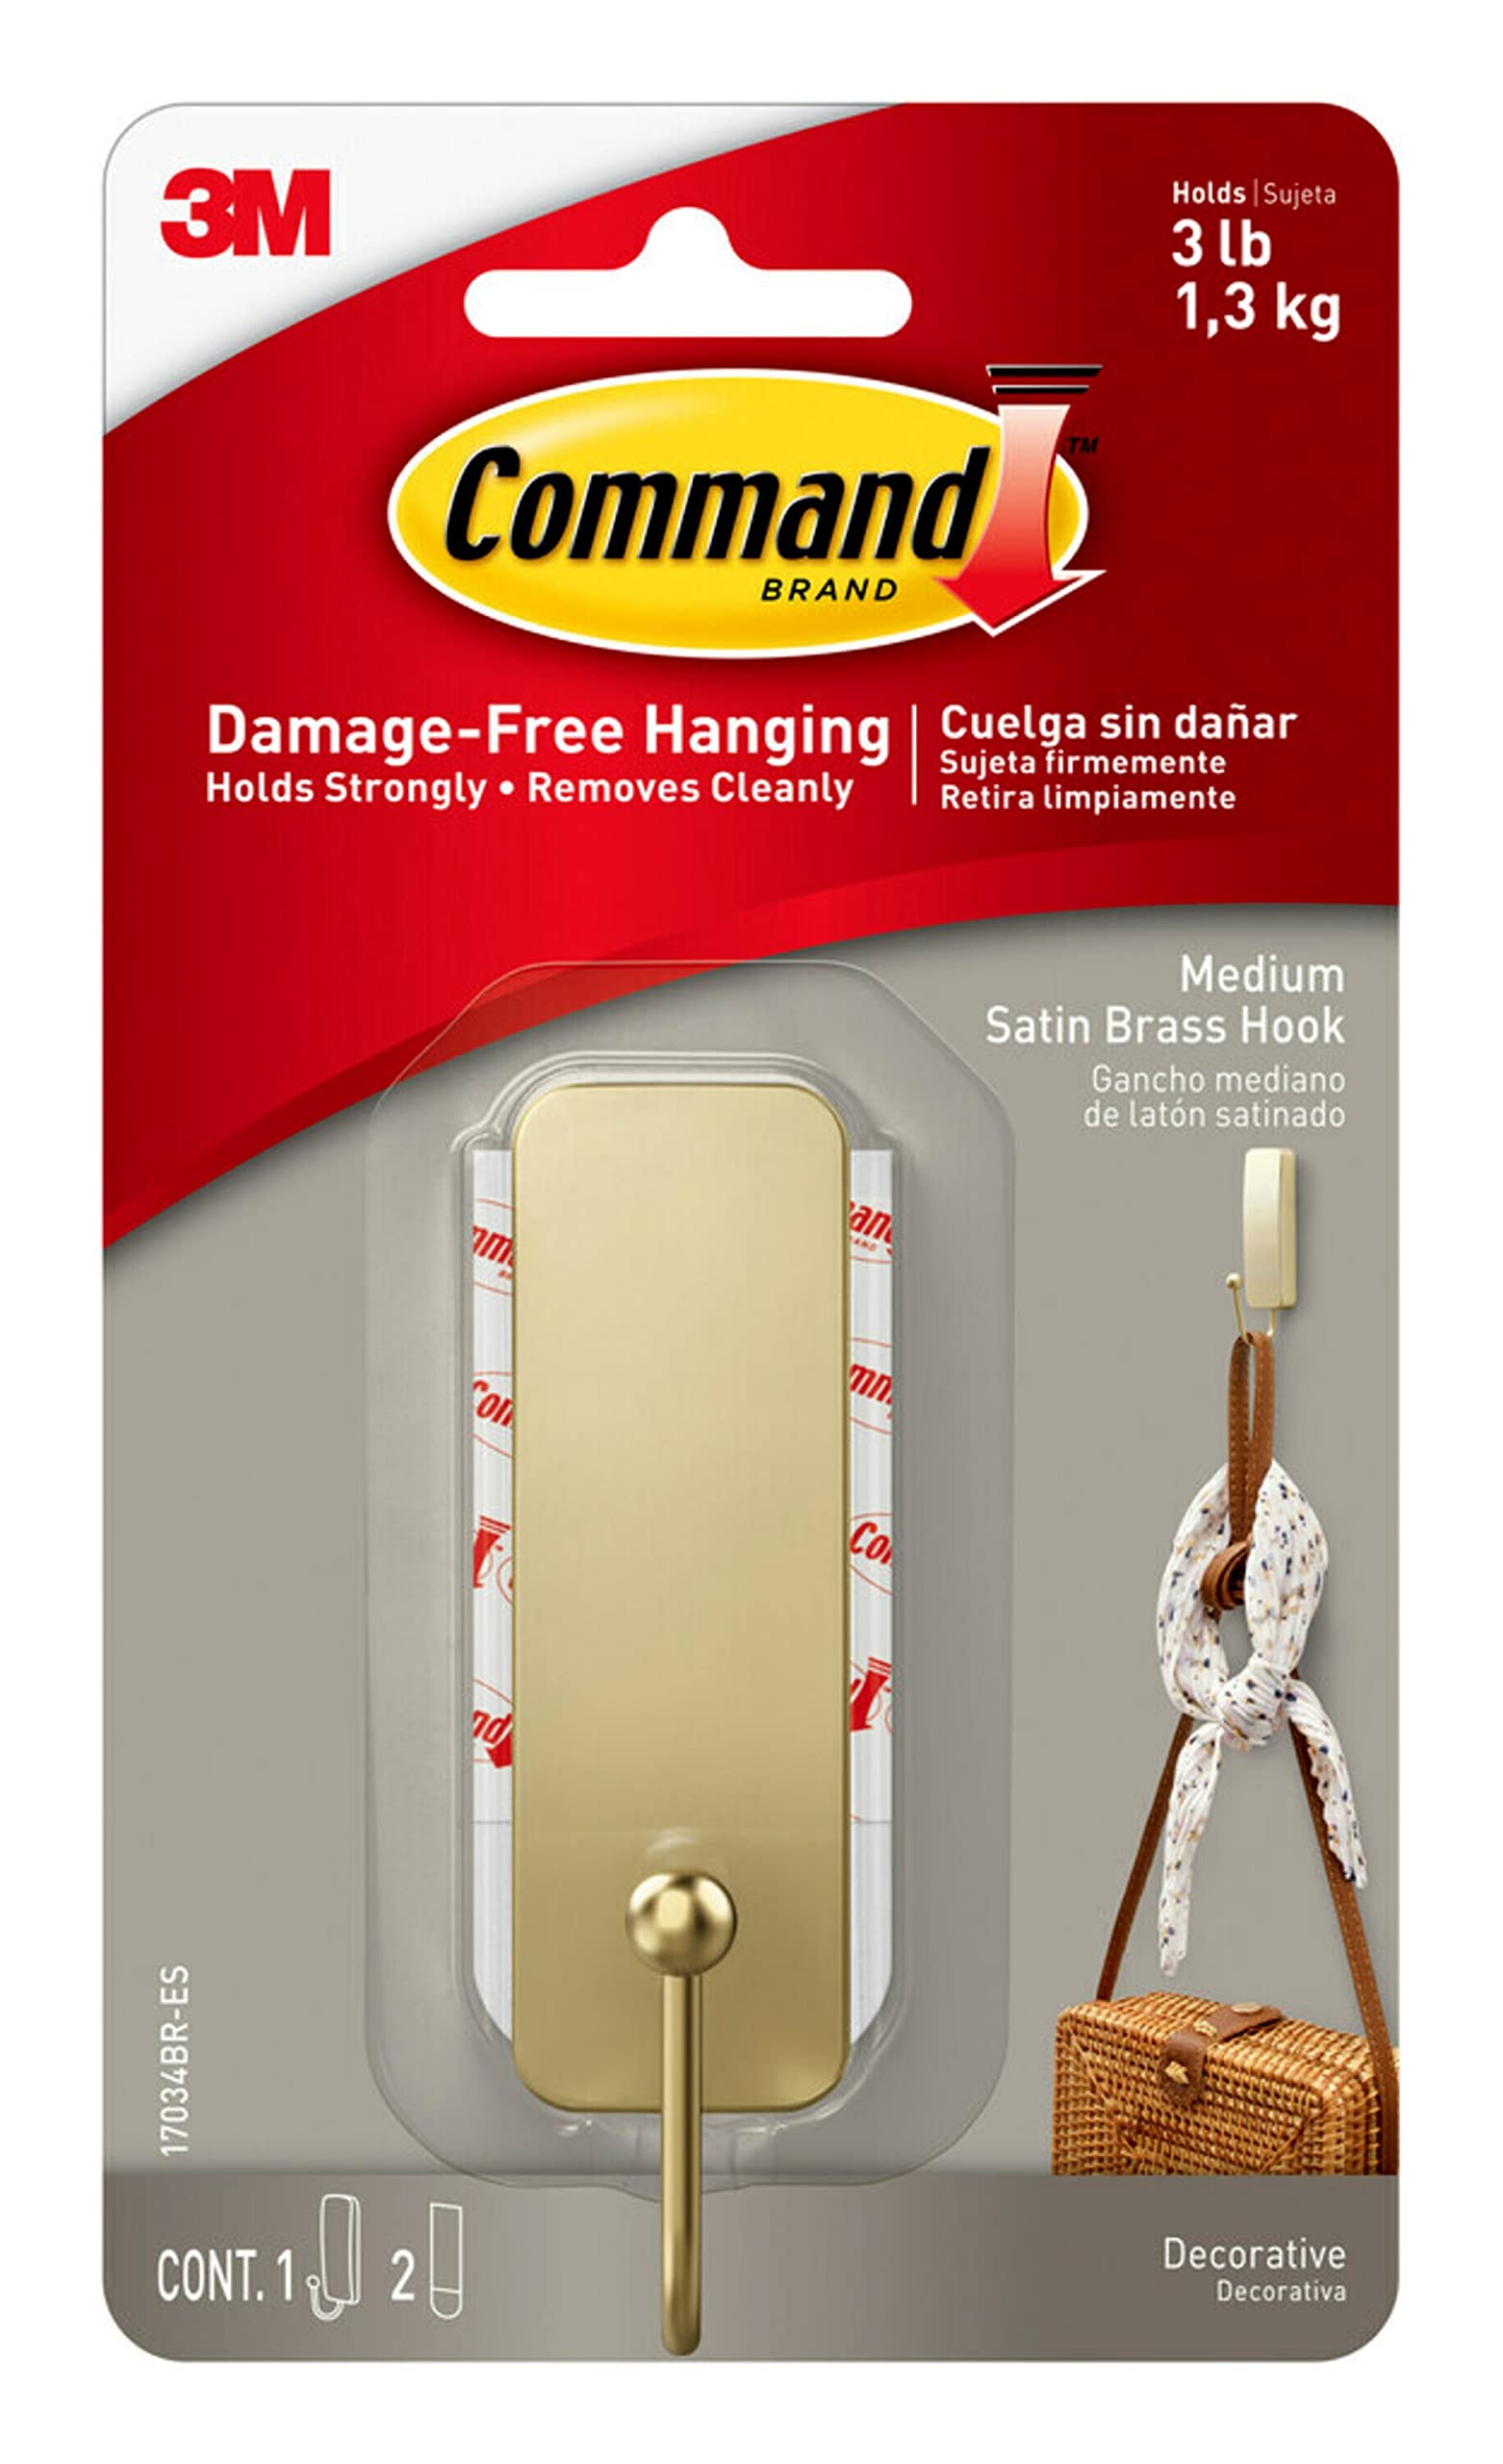 Command Medium Decorative Damage Free Hanging Wall Hooks with Adhesive  Strips No Tools Wall Hooks for Hanging Decorations in Living Spaces 1 Satin  Brass Hook and 2 Command Strips